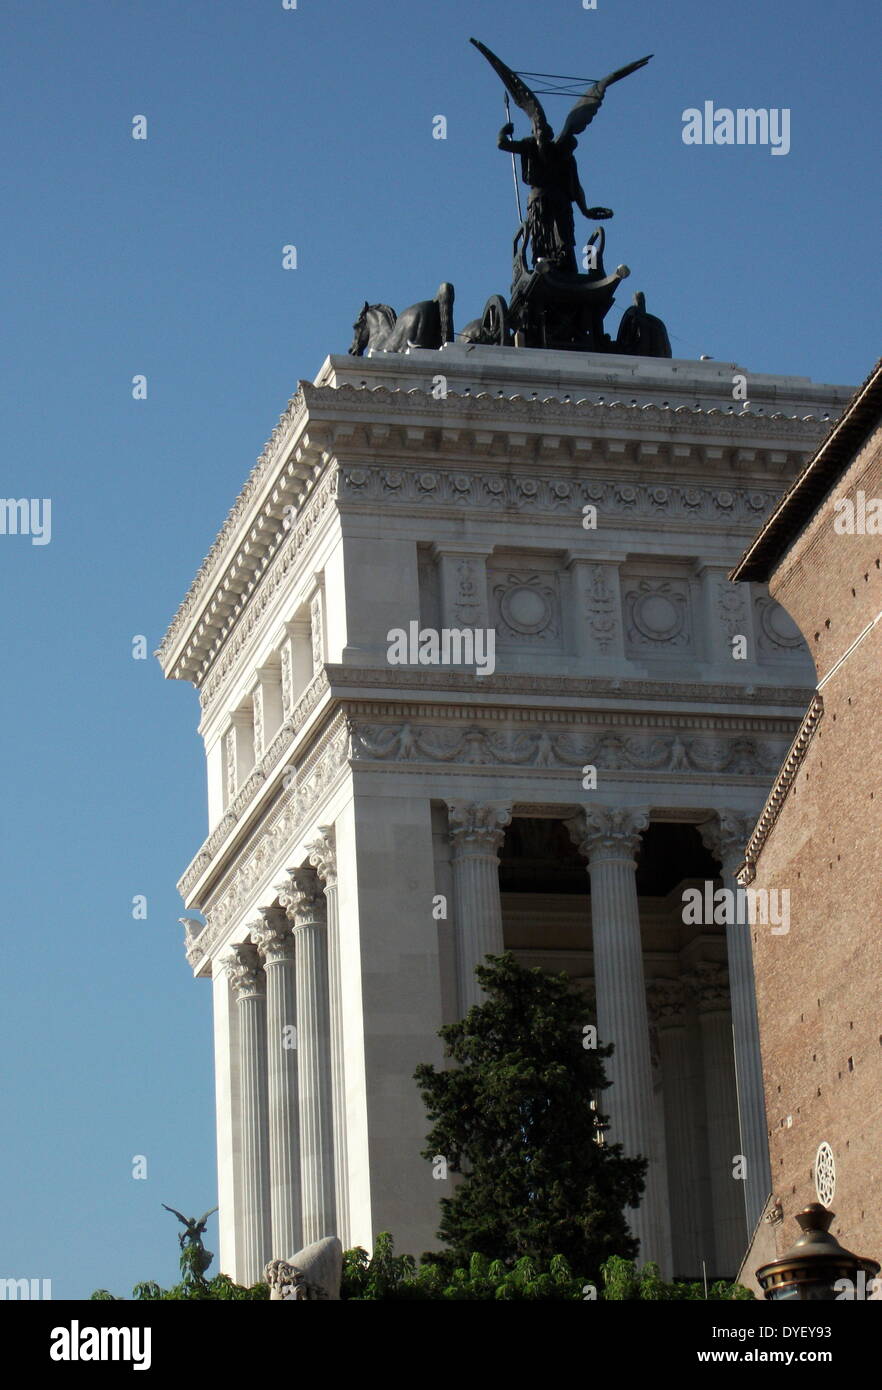 Sculptural detail from the entrance/courtyard to the Capitolini museums, in Rome, Italy. The museums themselves are contained within 3 palazzi as per designs by Michelangelo Buonarroti in 1536, they were then built over a 400 year period. Stock Photo